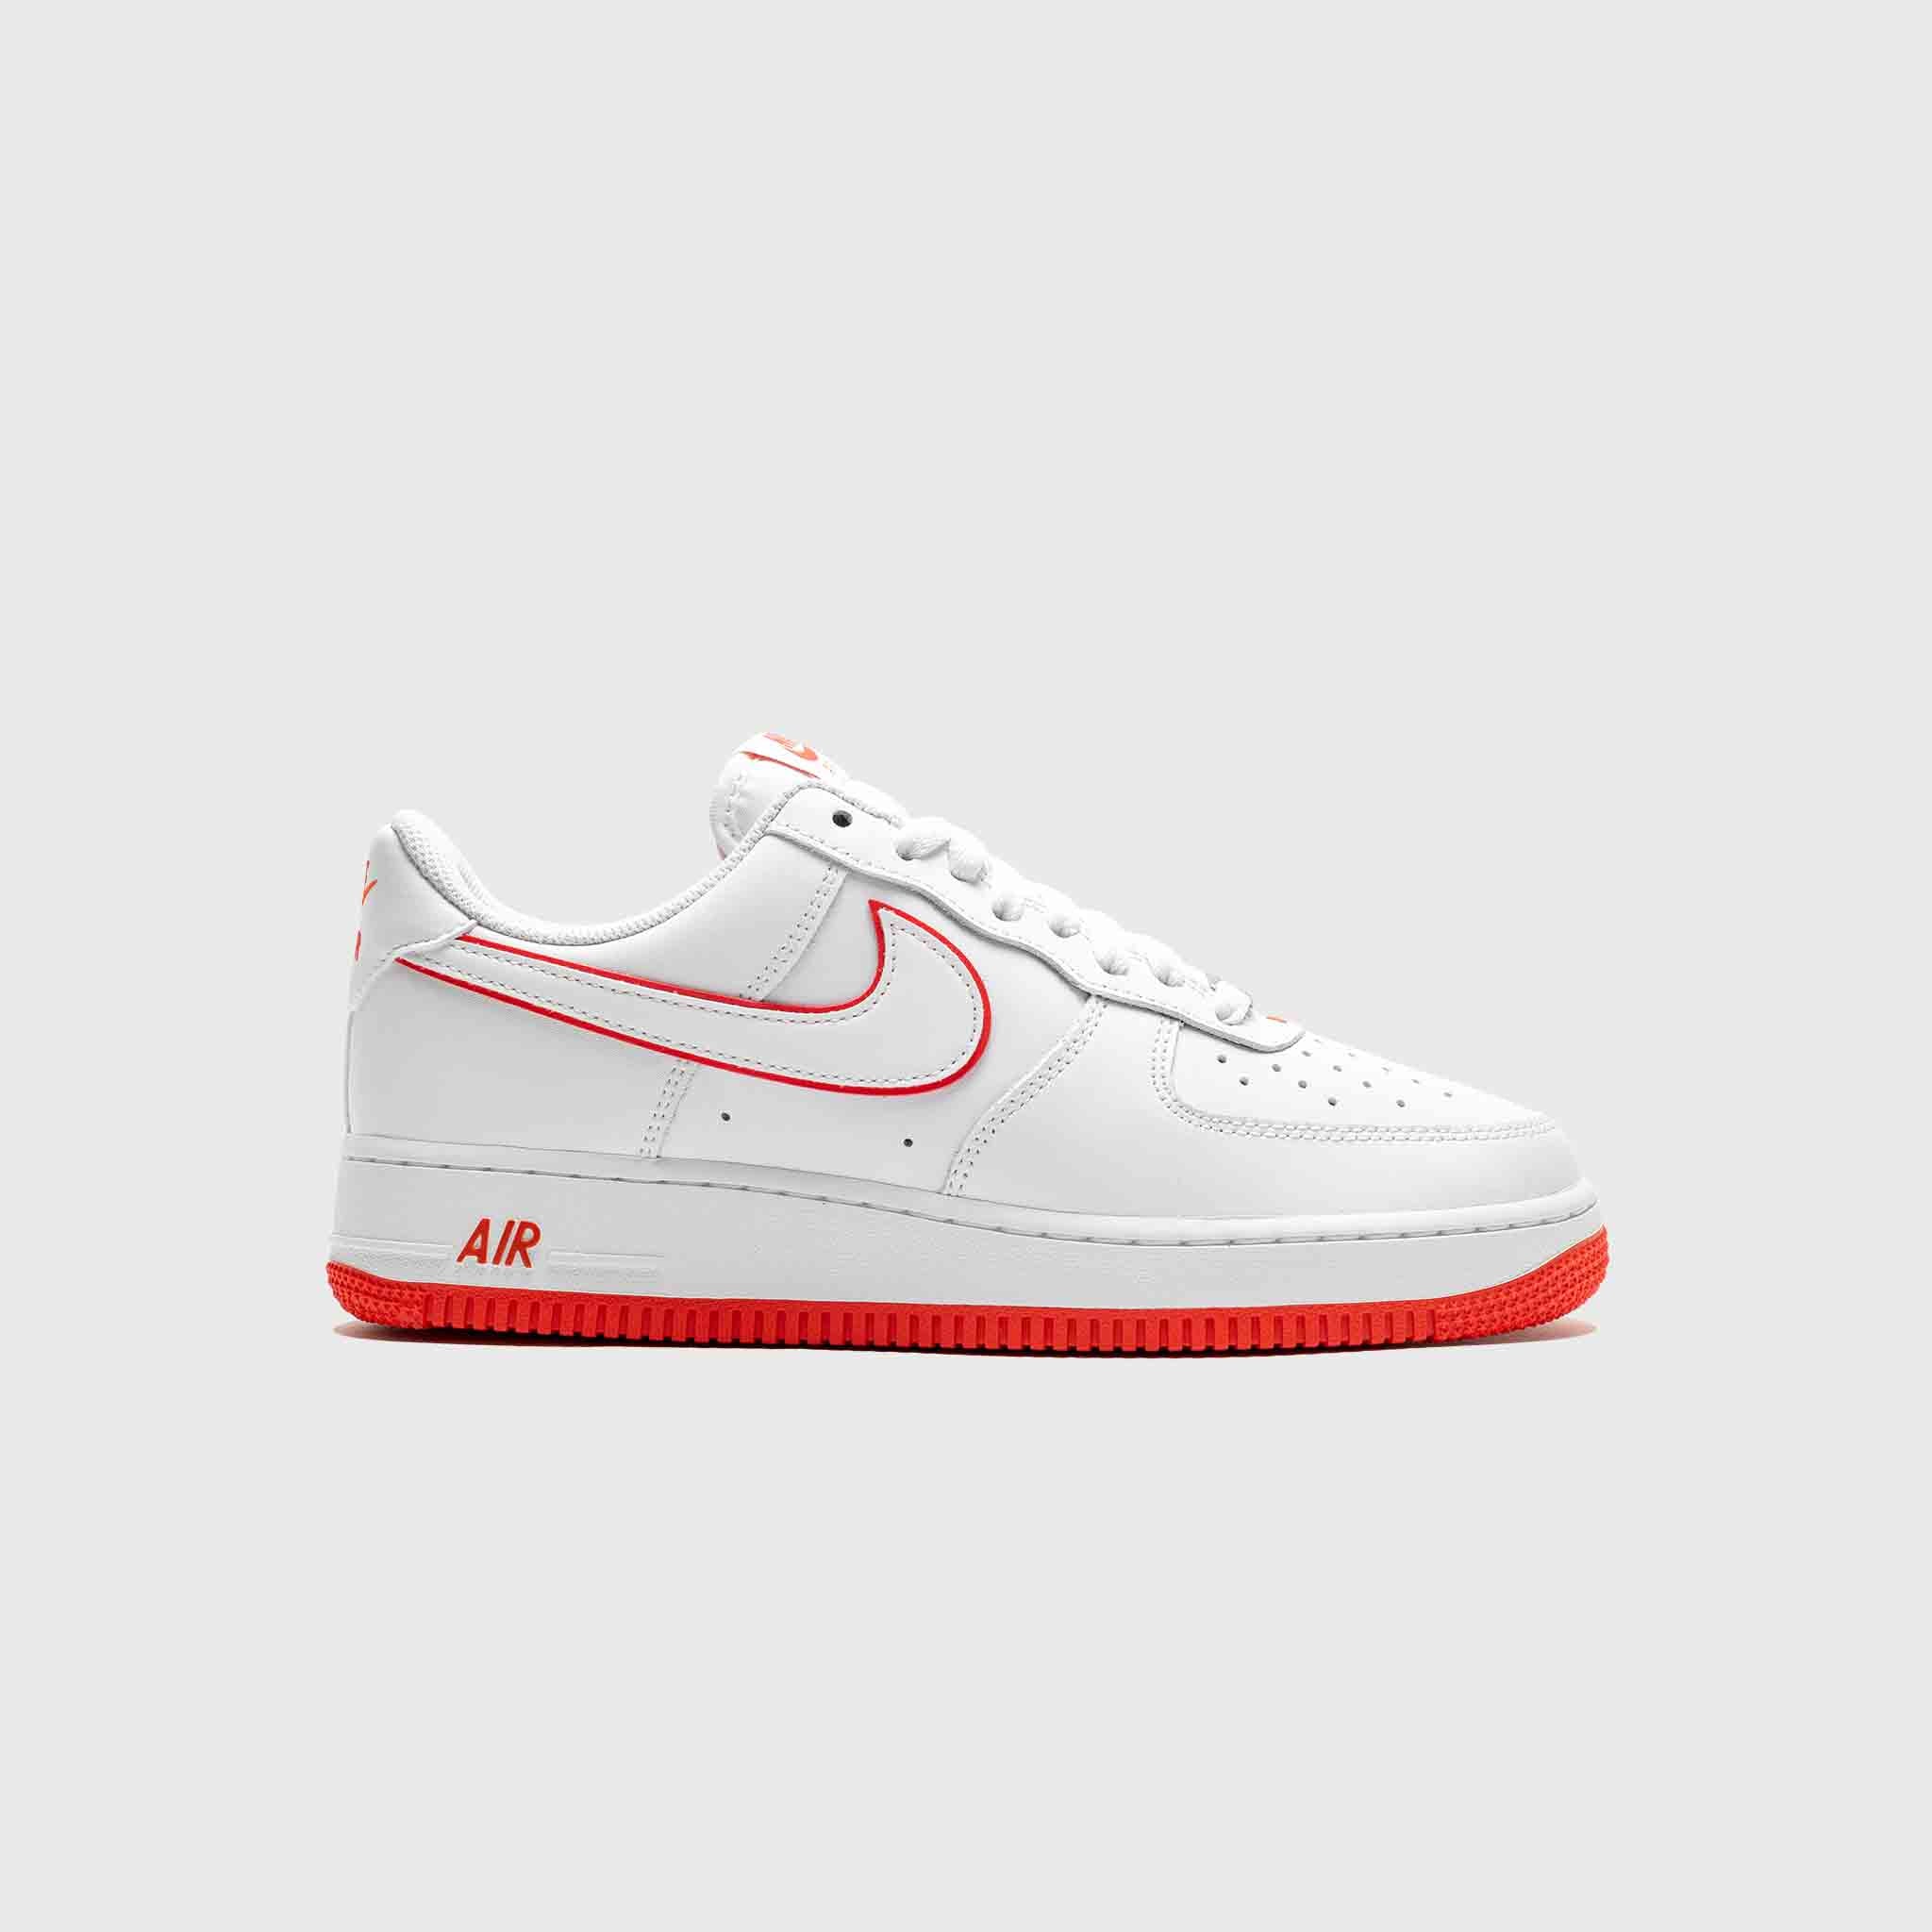 Nike Air Force 1 '07 Picante Red/White Men's Shoes, Size: 10.5